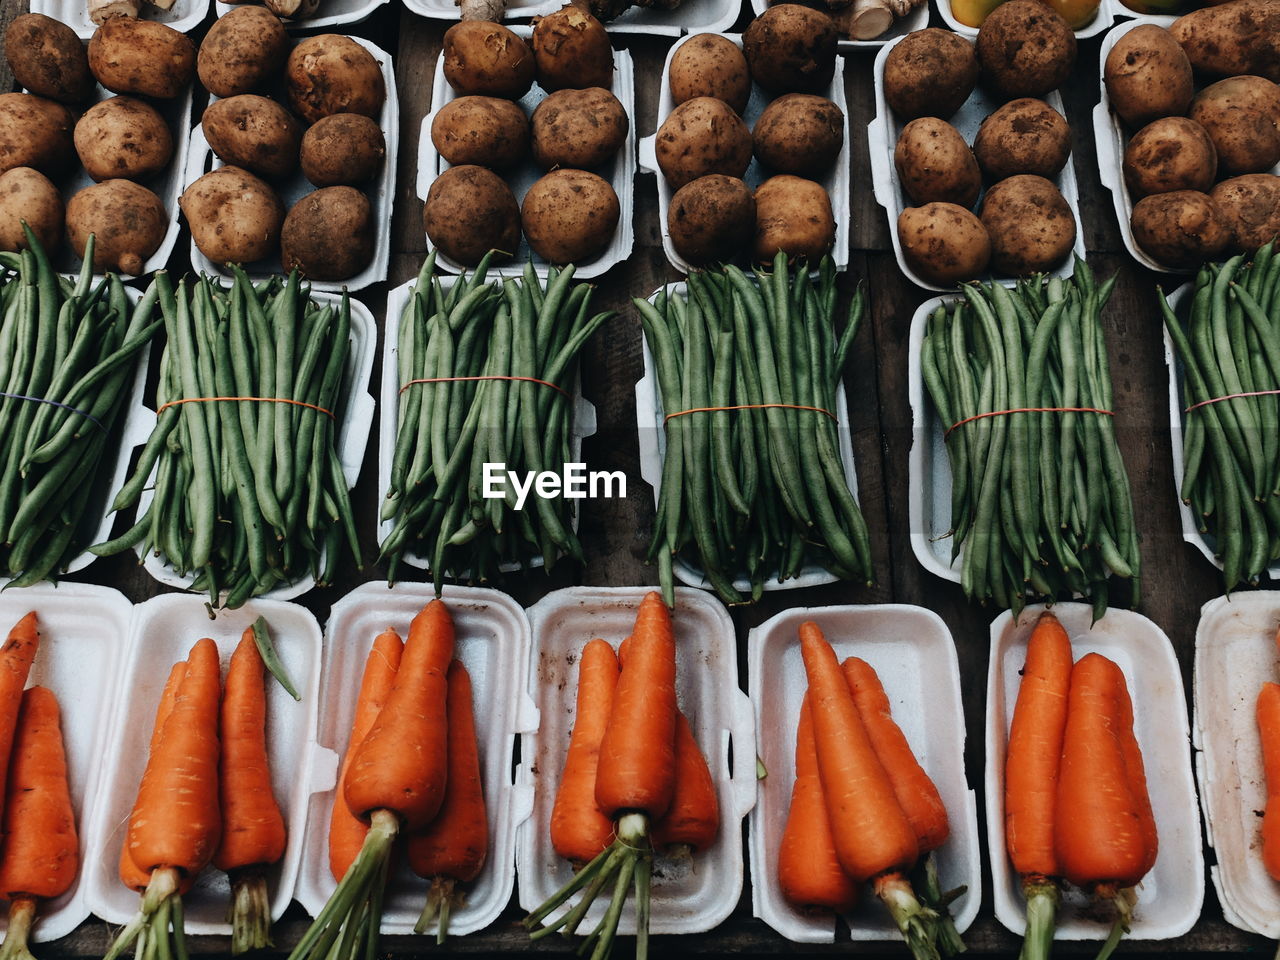 Full frame shot of carrots, potatoes, and green beans for sale